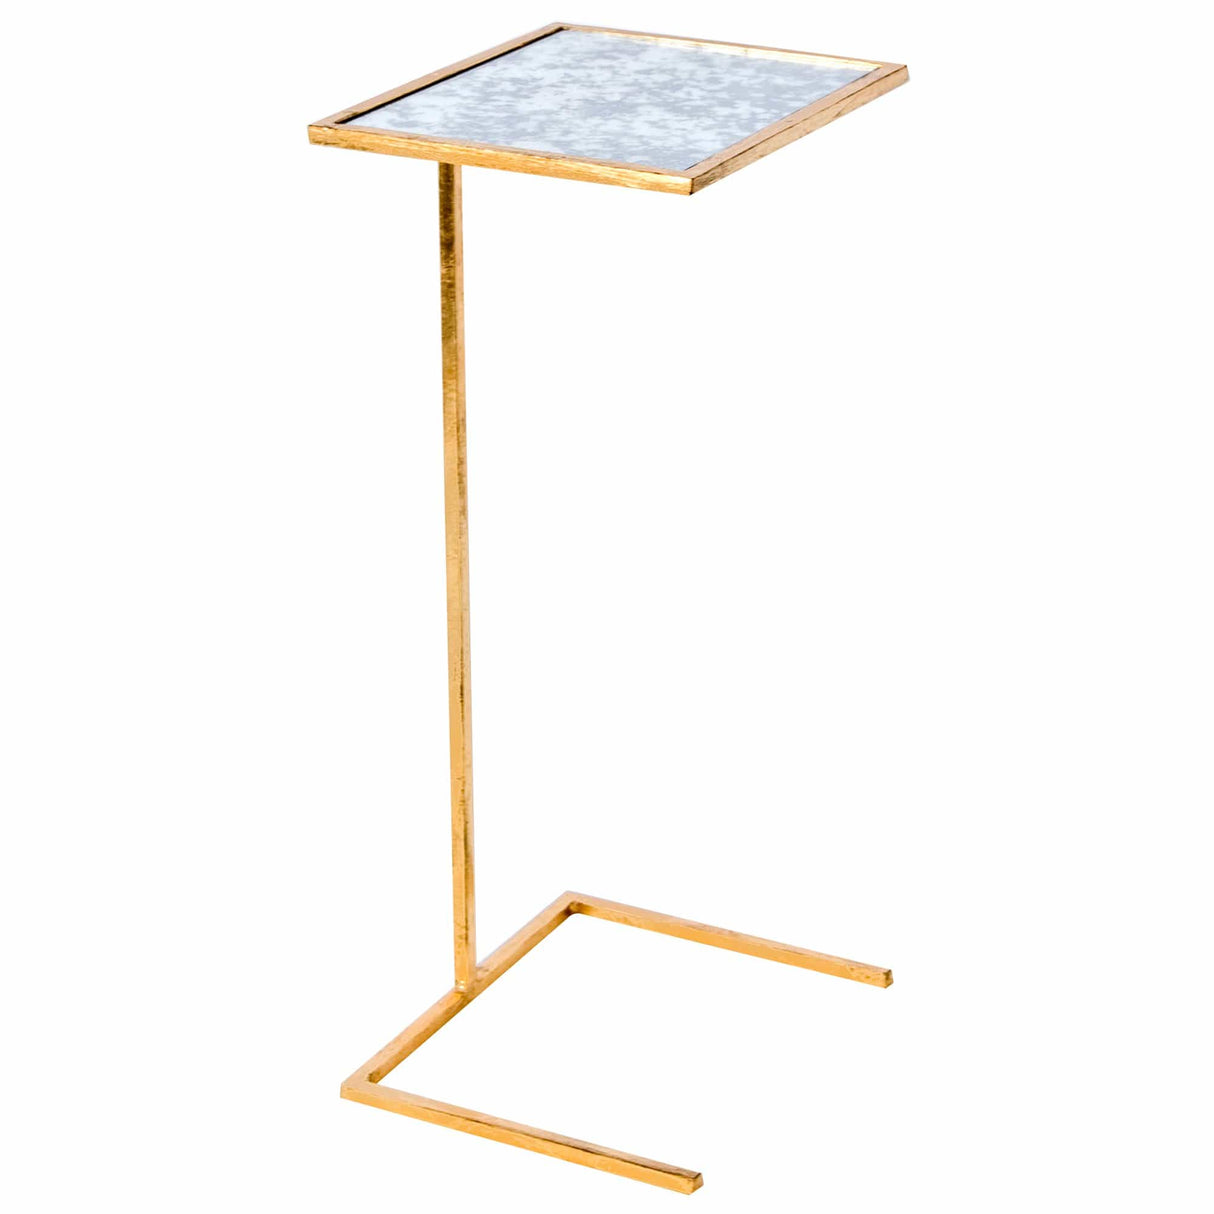 Worlds Away Cigar Table in Gold Leaf with Antique Mirror Top Furniture Worlds-Away-FNCMAMG 00607629003902